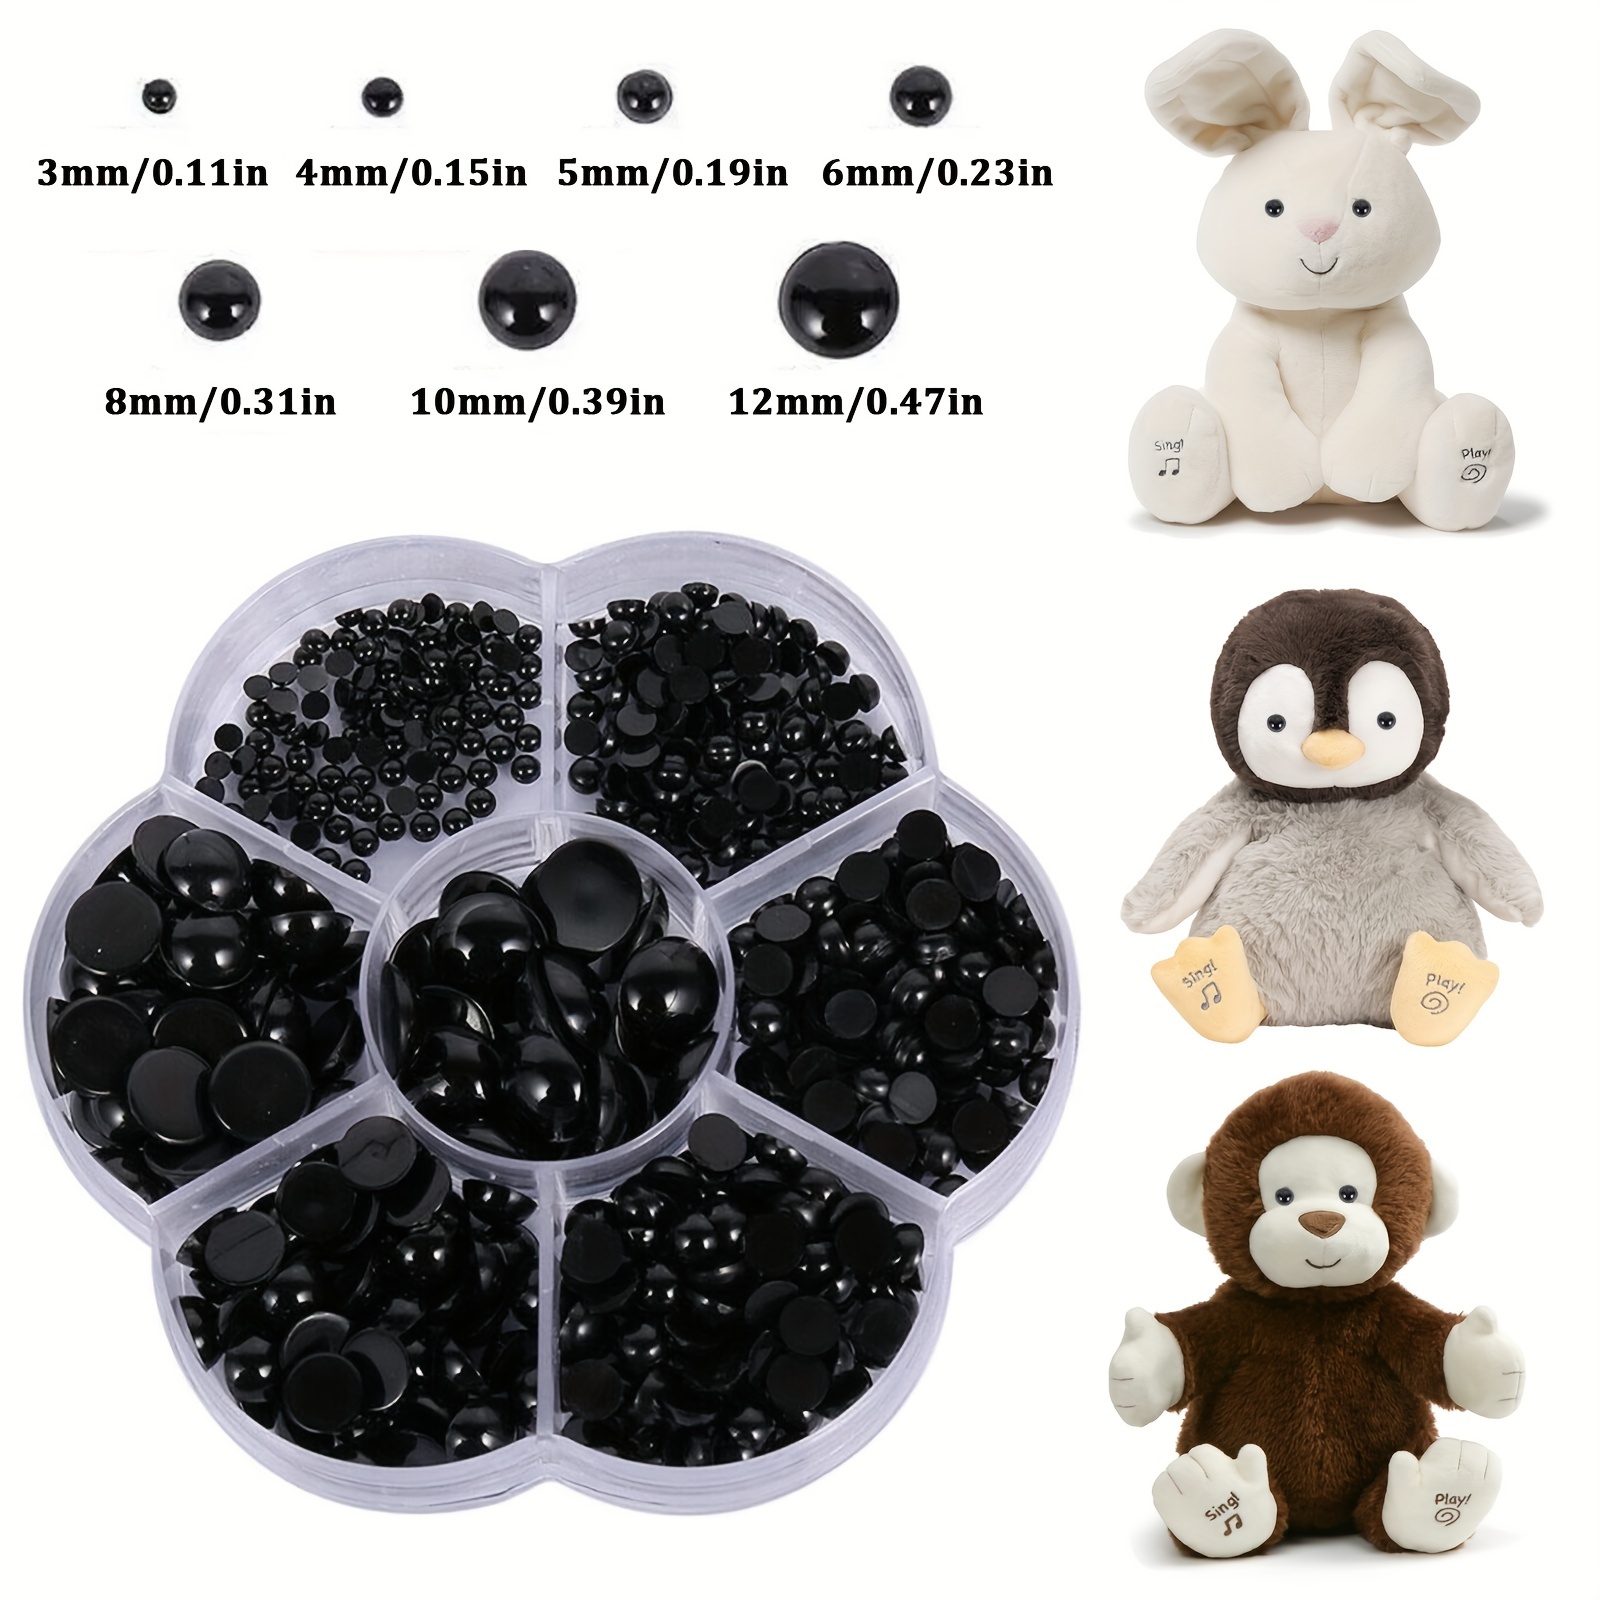  100 Pieces Large Safety Eyes for Amigurumi Stuffed Glitter  Animal Eyes Plastic Craft Crochet Eyes for DIY of Puppet Bear Crafts Toy  Doll Making Supplies (Black,20mm)